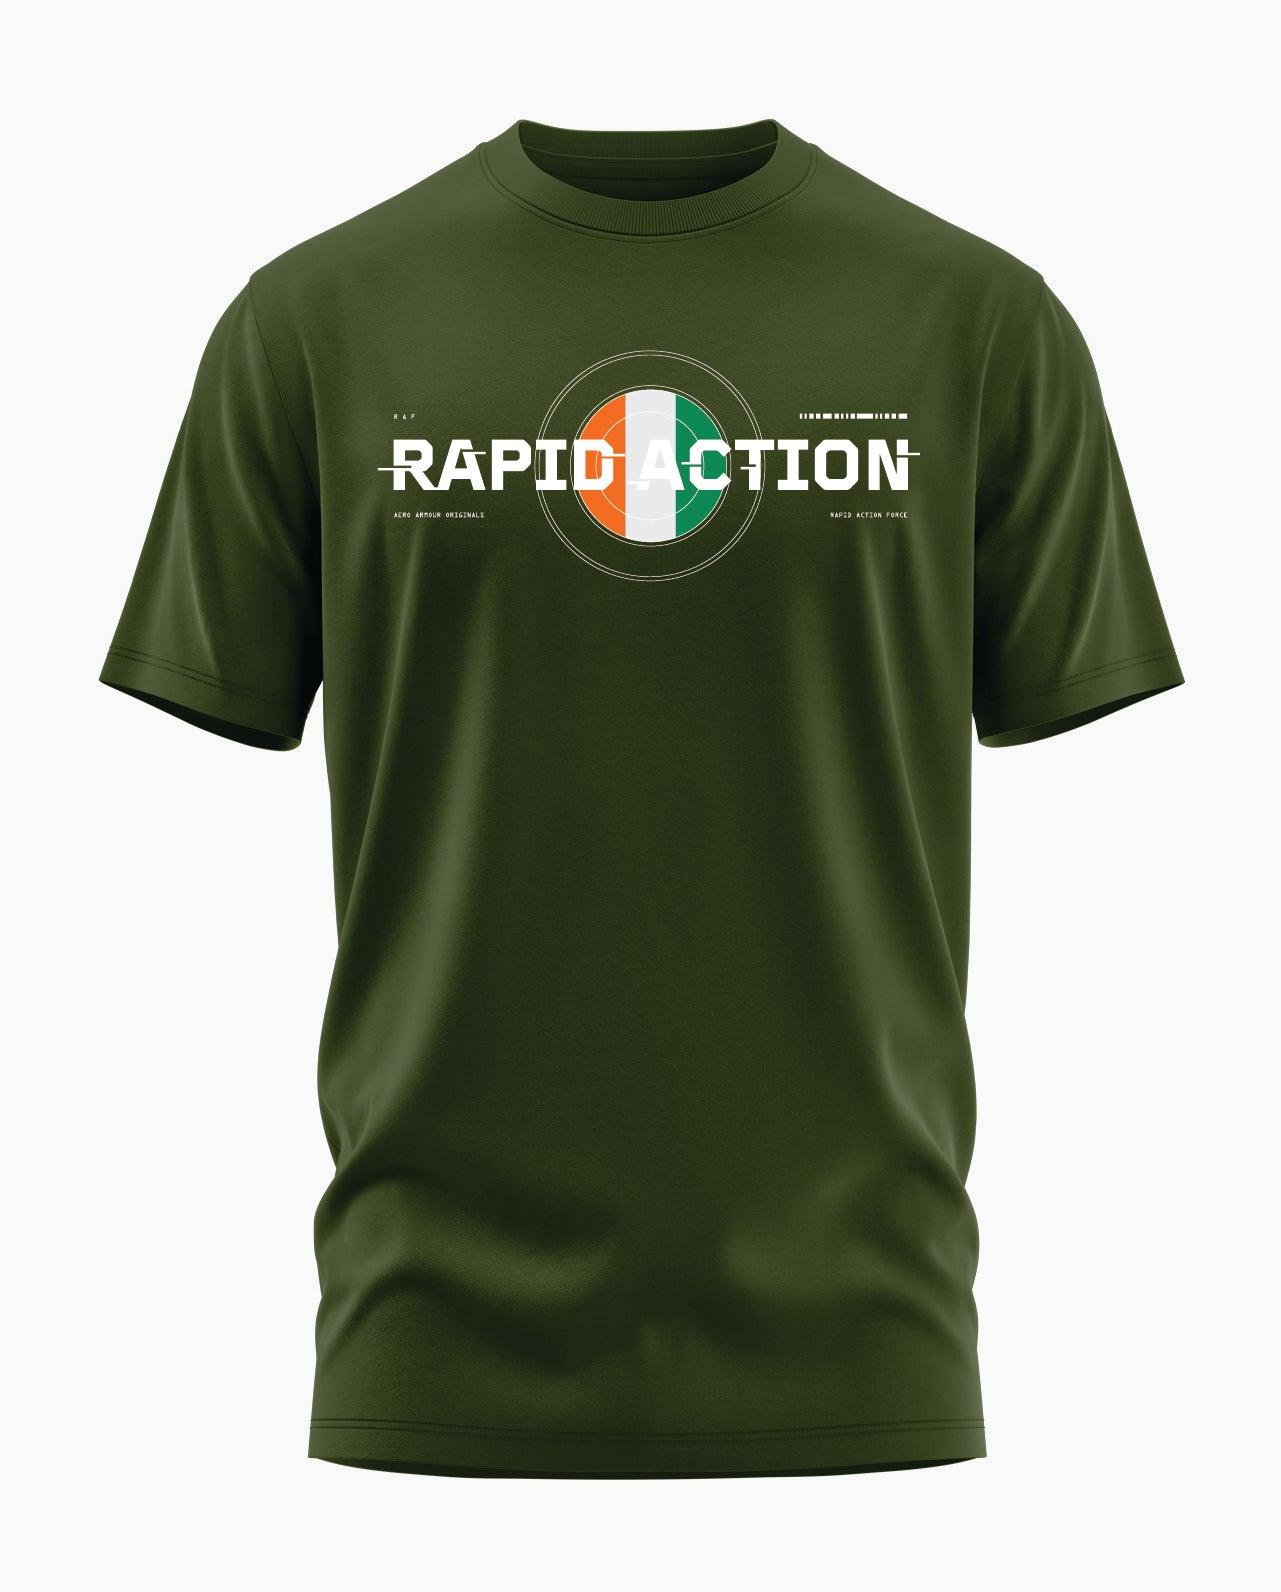 Rapid Action Force T-Shirt - Aero Armour